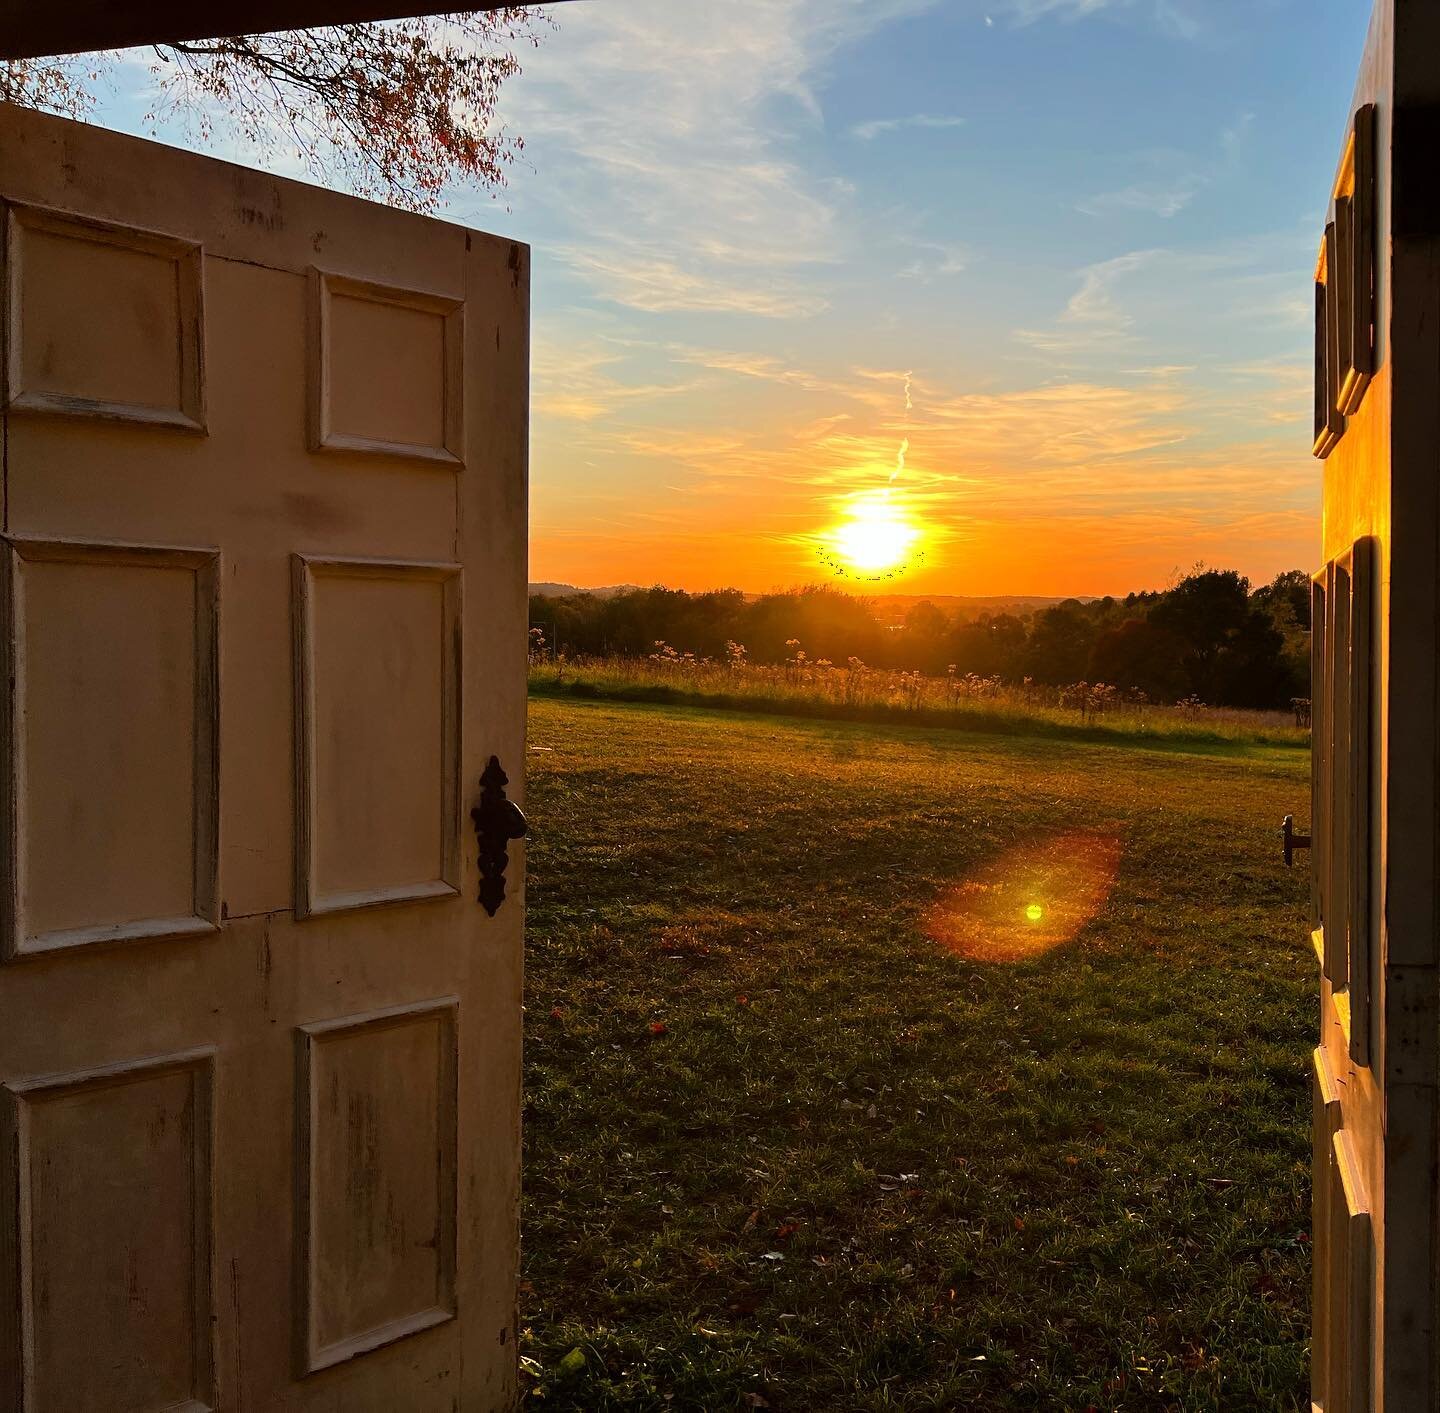 Imagine this view after saying your vows! Our farm has some of the best sunset vistas around. We are still booking 2023 and 2024, reach out for info!